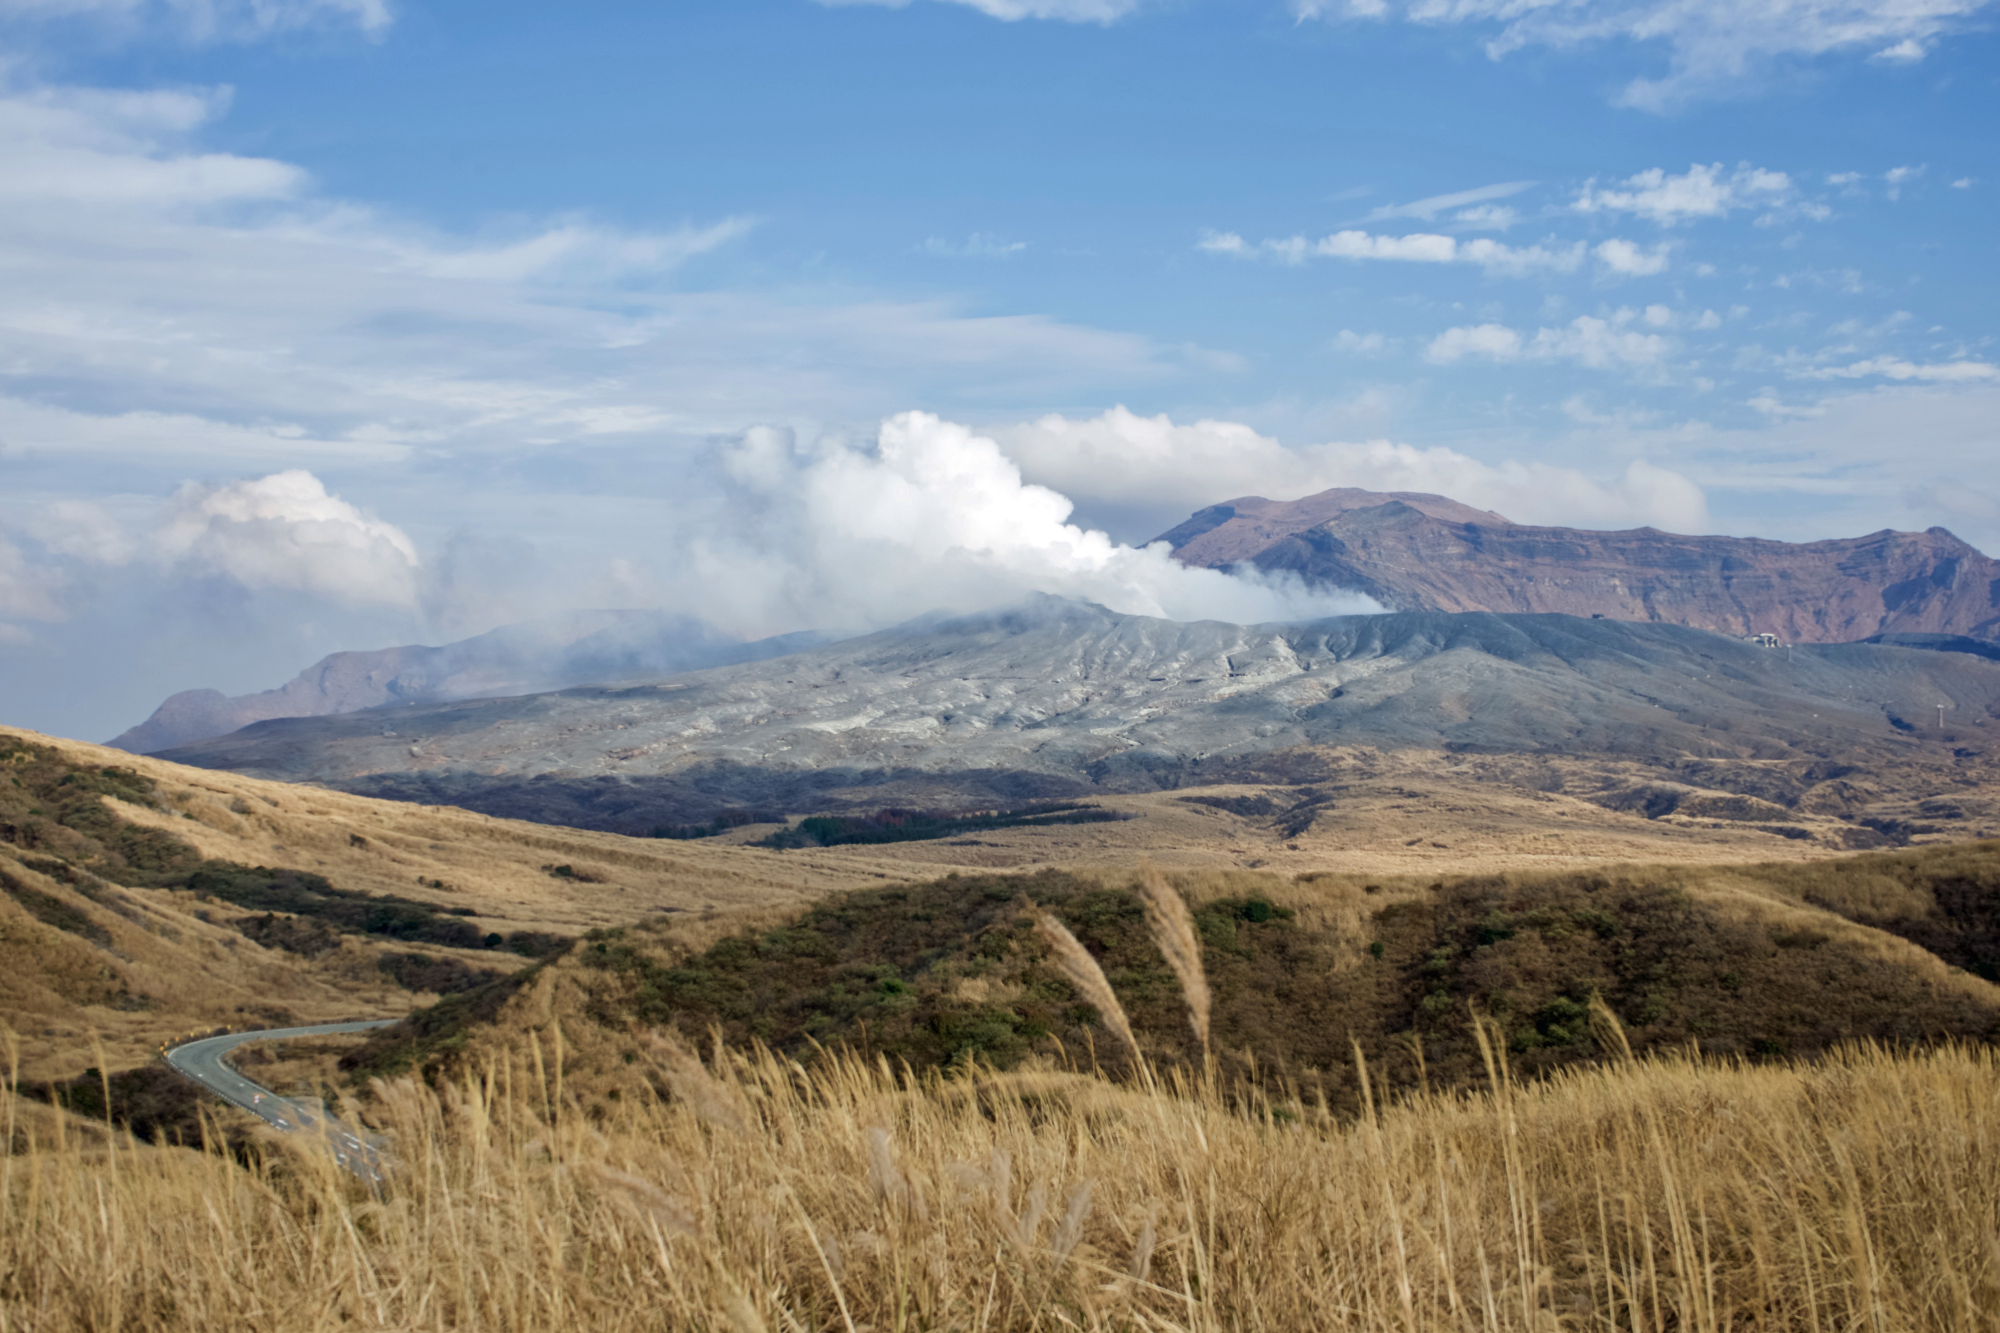 Fit for a villain: The smoking crater and volcanic landscape of Mount Aso, Kumamoto Prefecture, which features in the James Bond novel 'You Only Live Twice.' | OSCAR BOYD